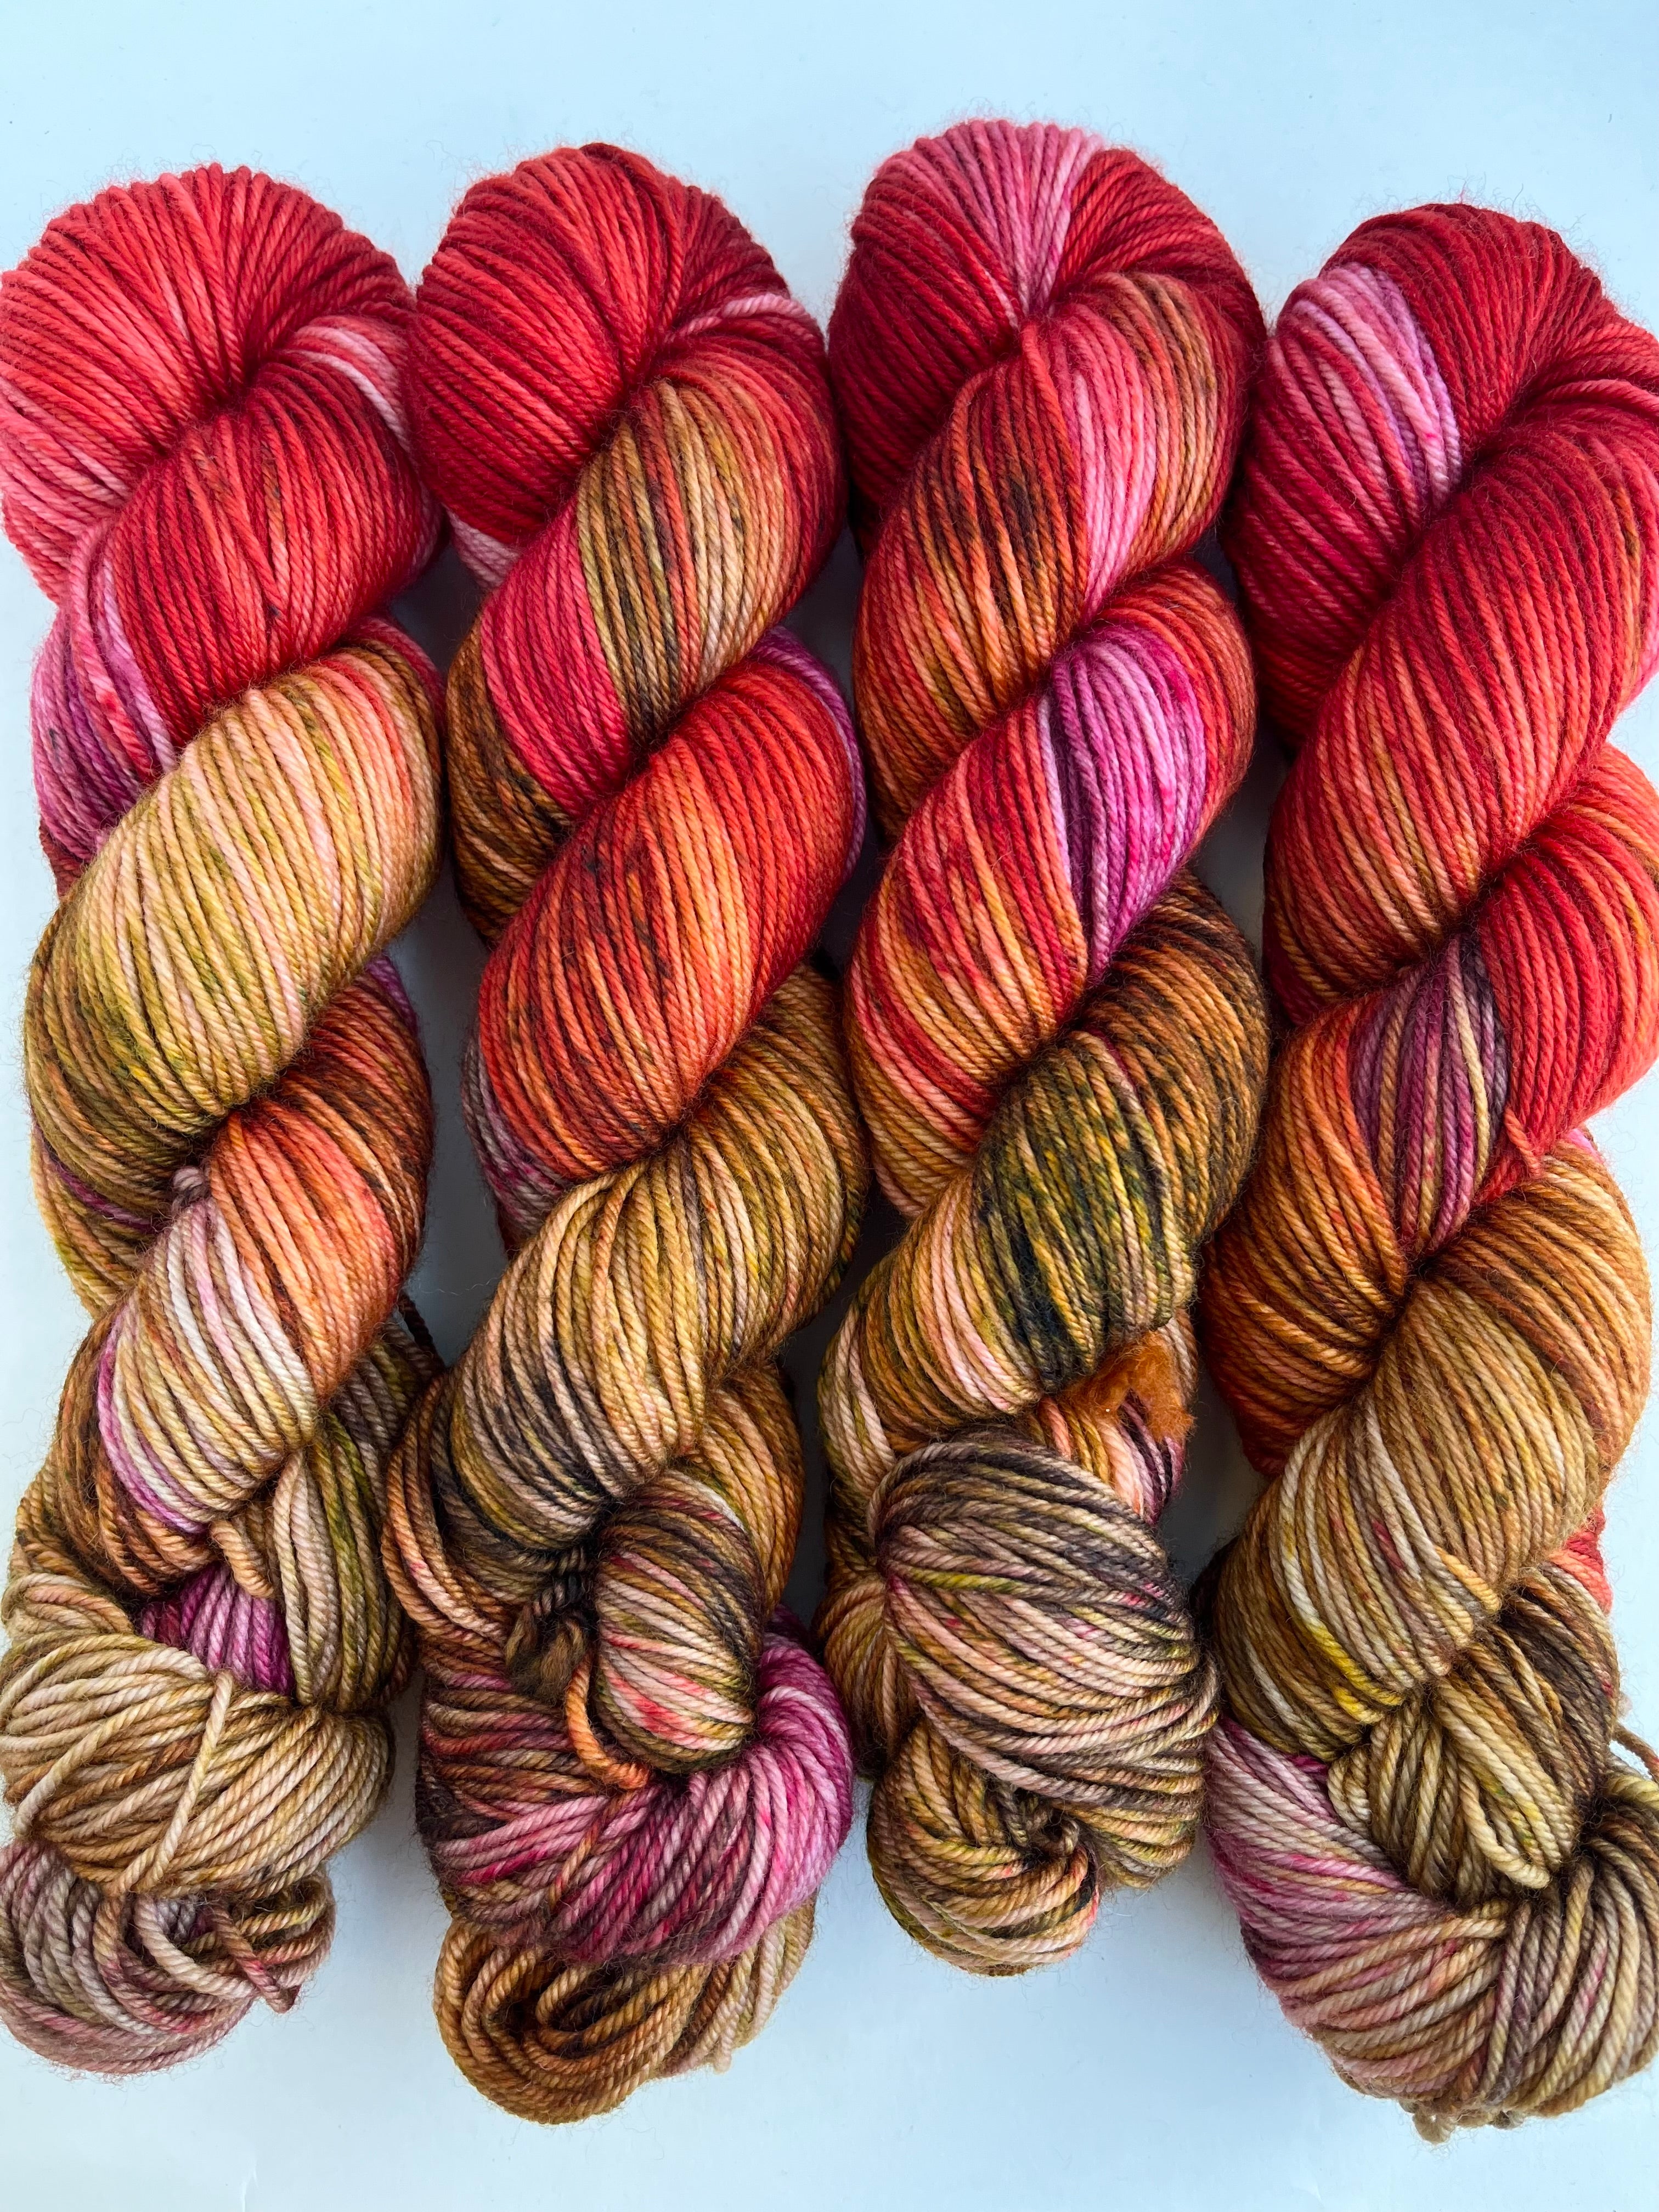 Tidal DK from Tributary Yarns